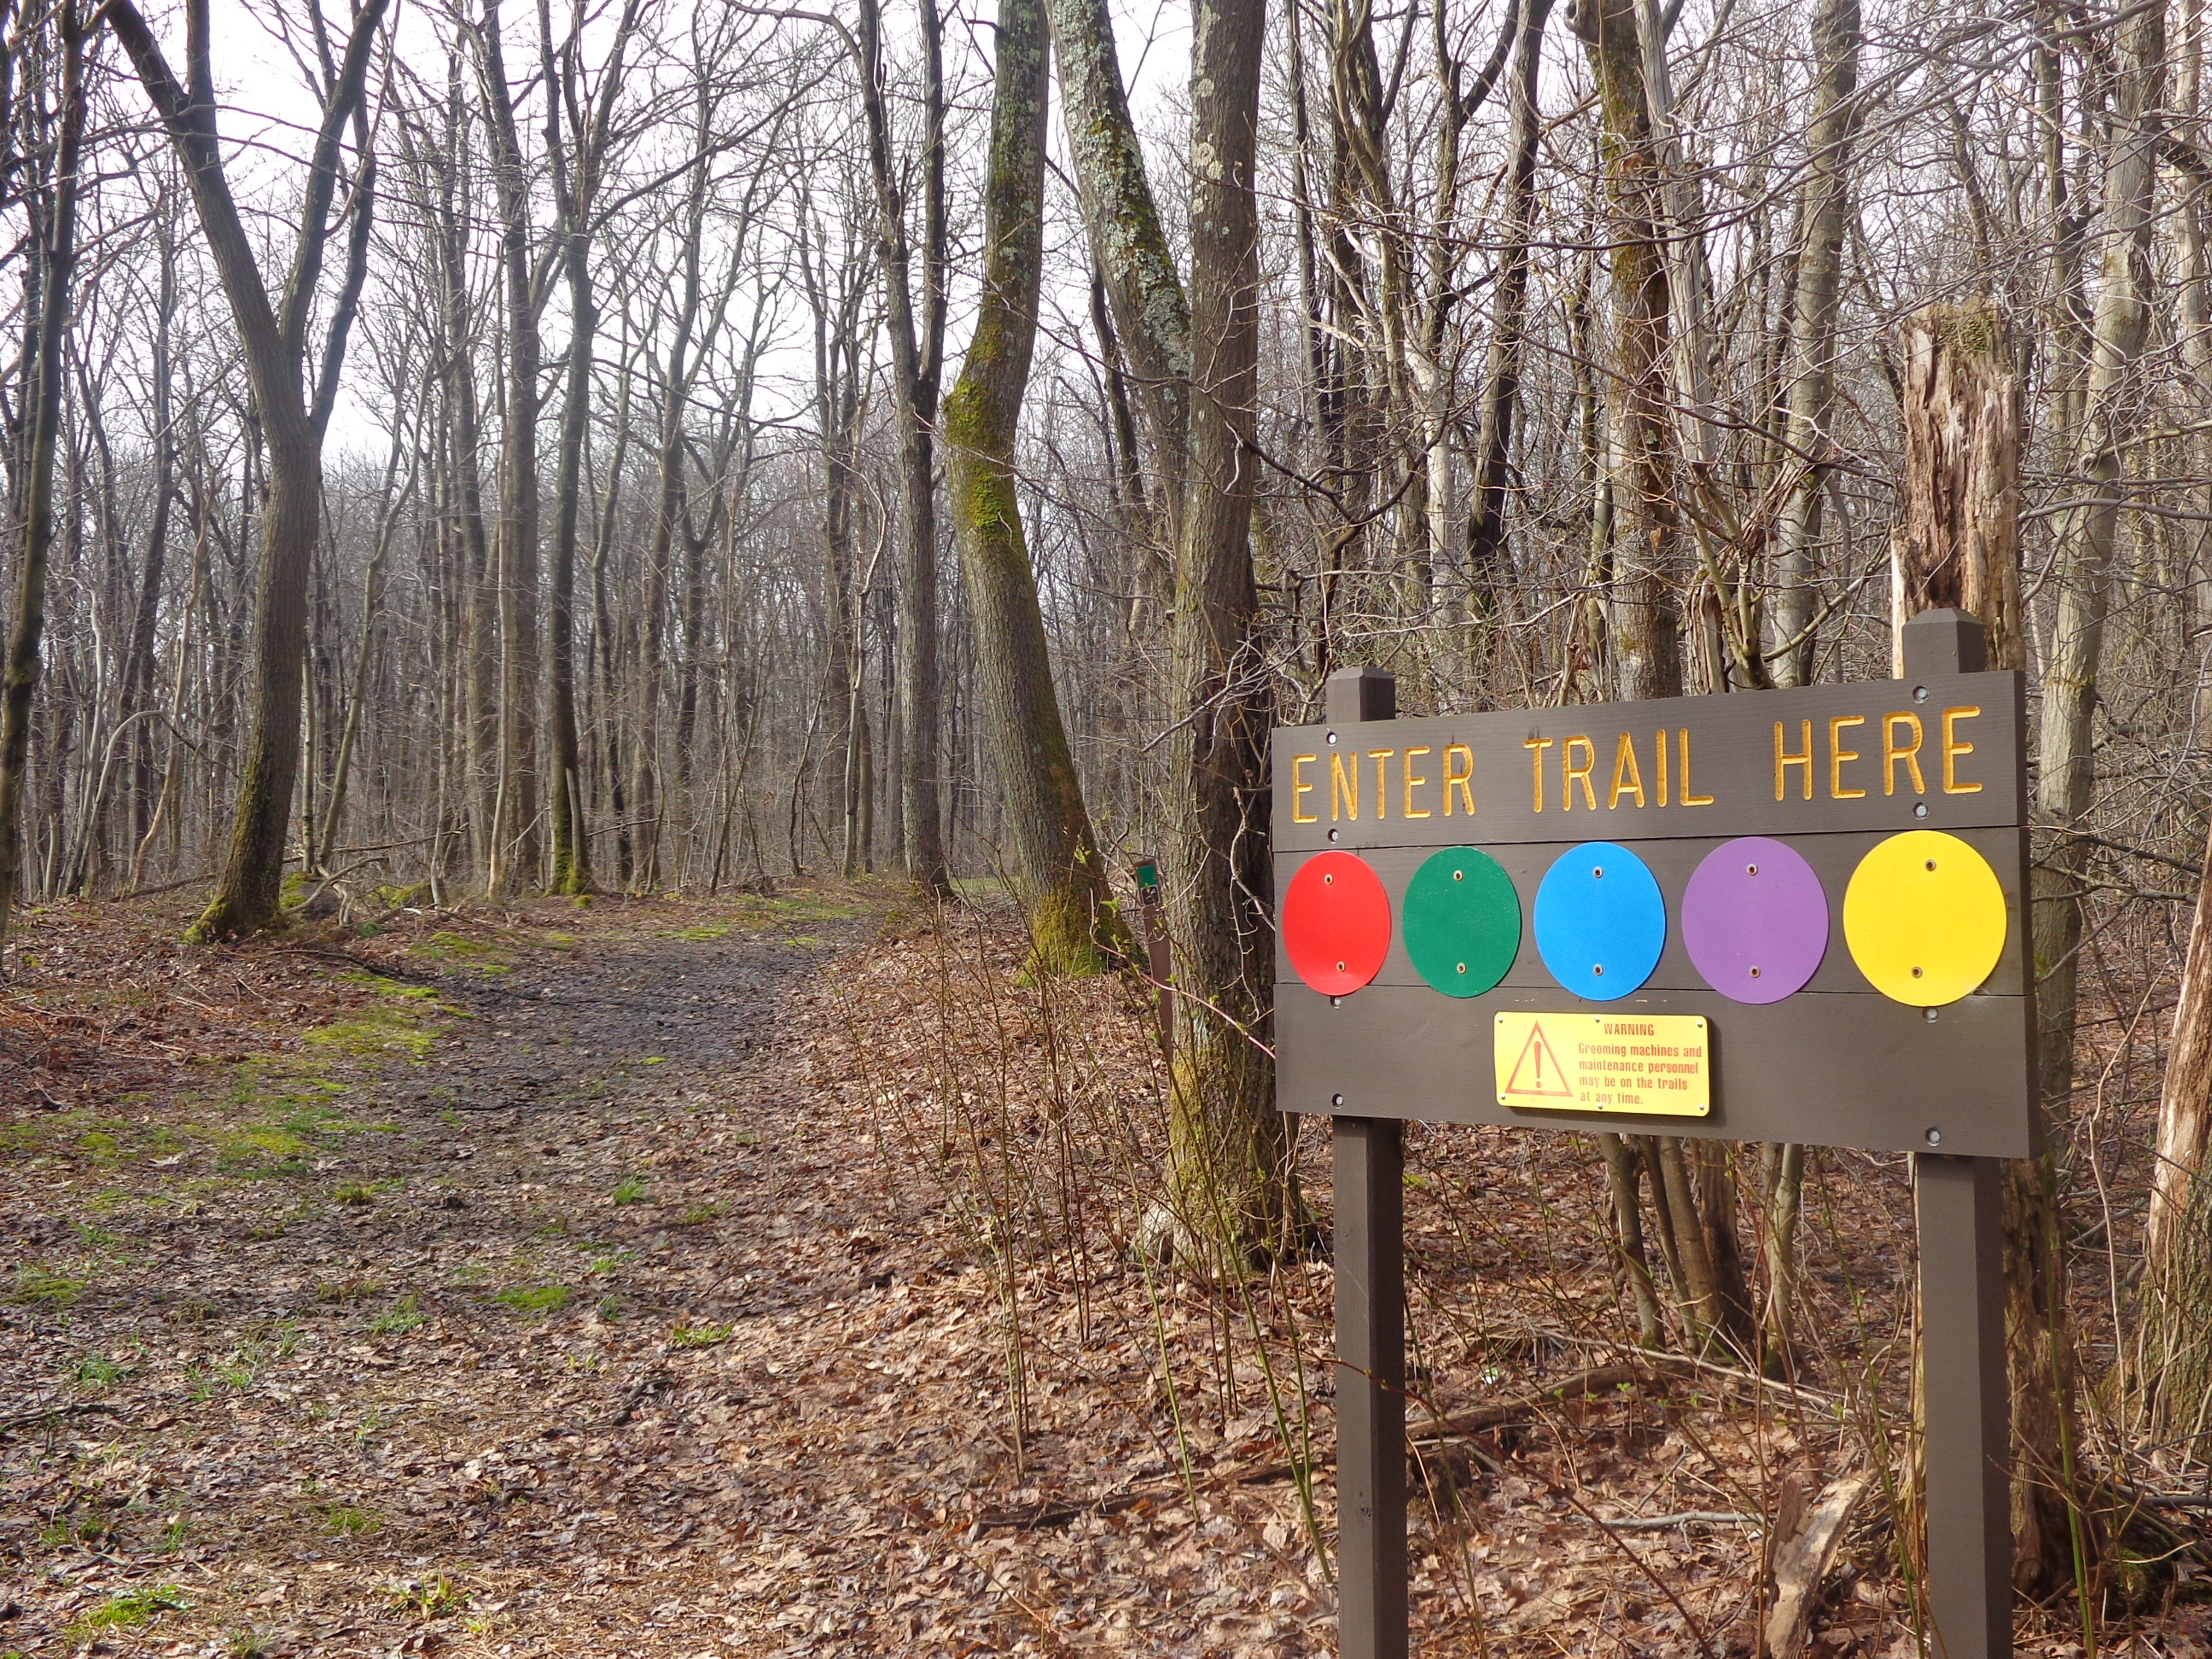 Signage stating "Enter Trail Here" sits before a trail head in a wooded fall setting with bare trees